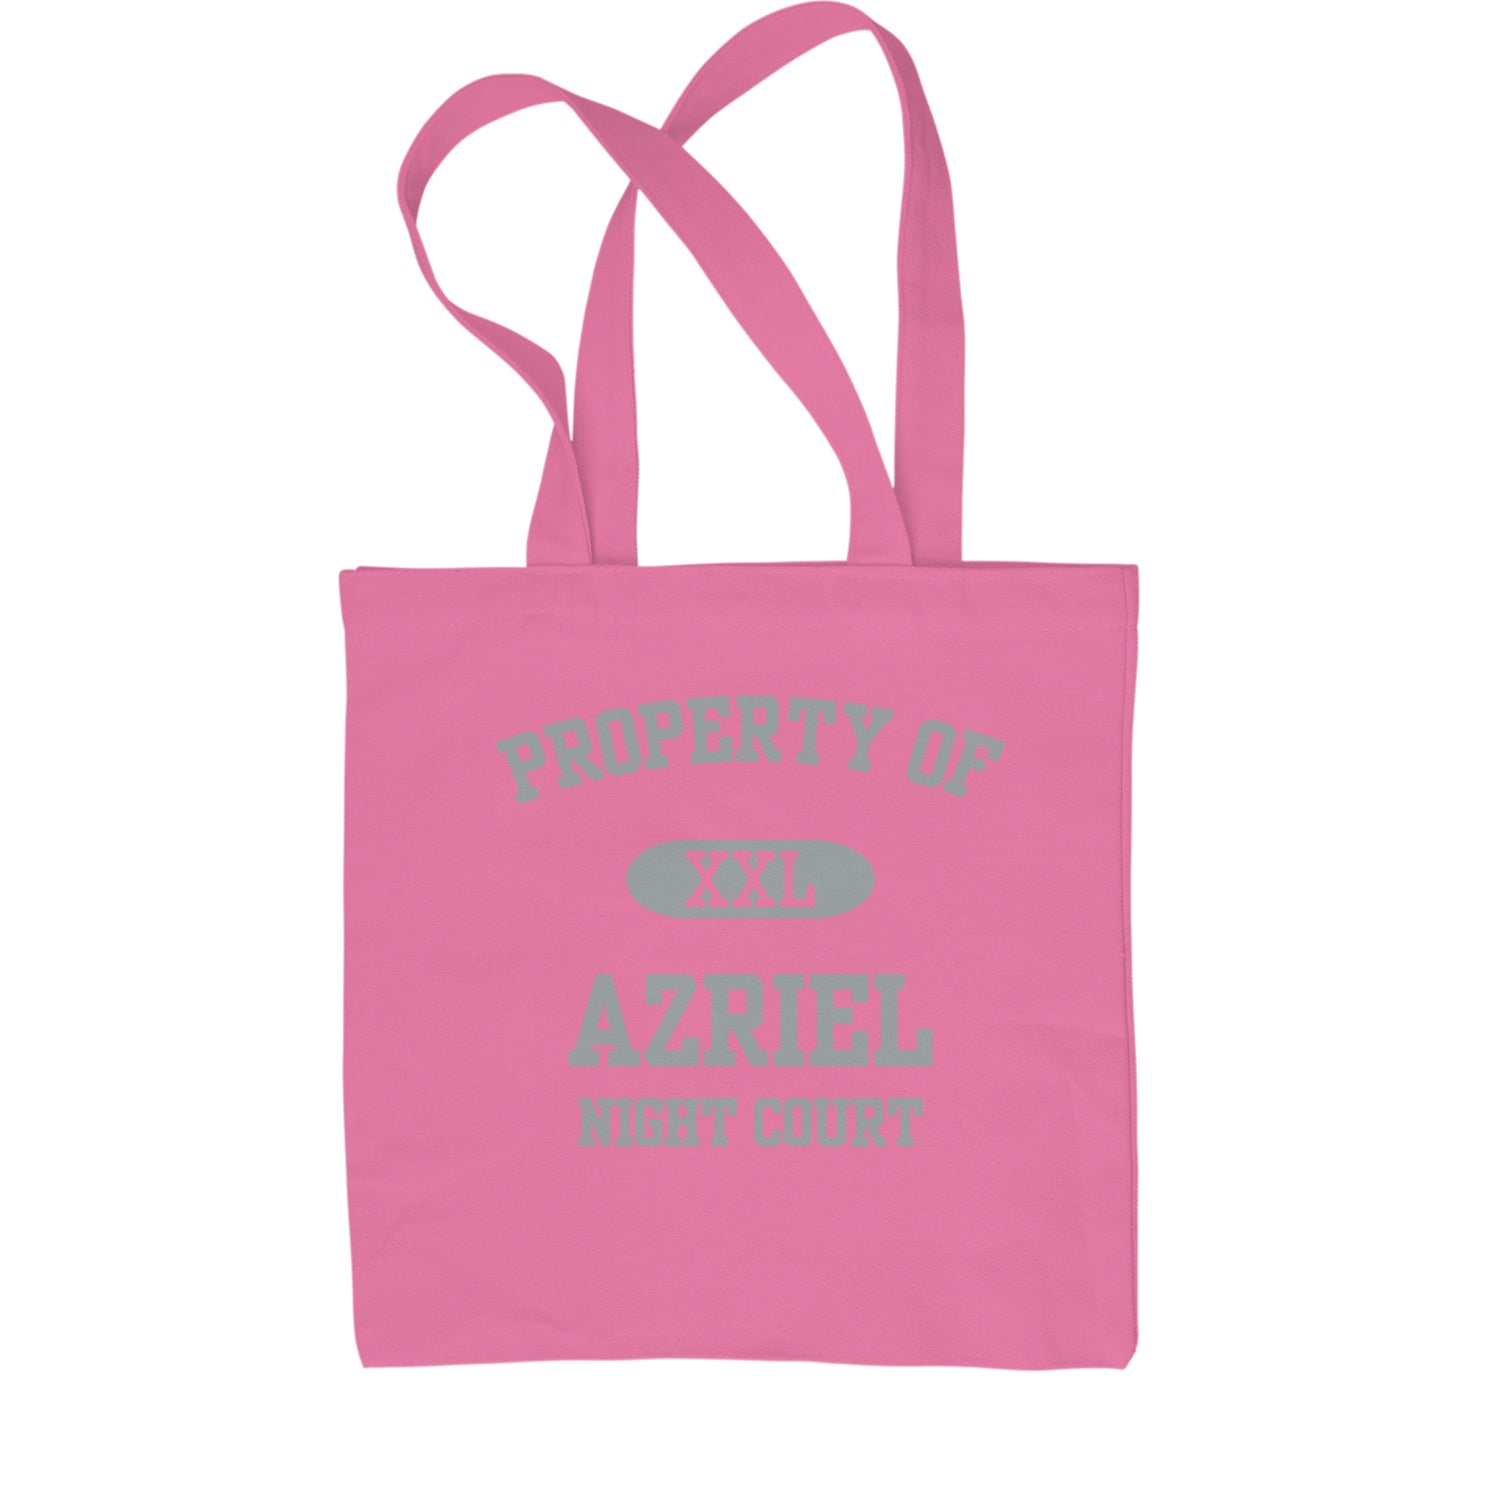 Property Of Azriel ACOTAR Shopping Tote Bag acotar, court, maas, tamlin, thorns by Expression Tees